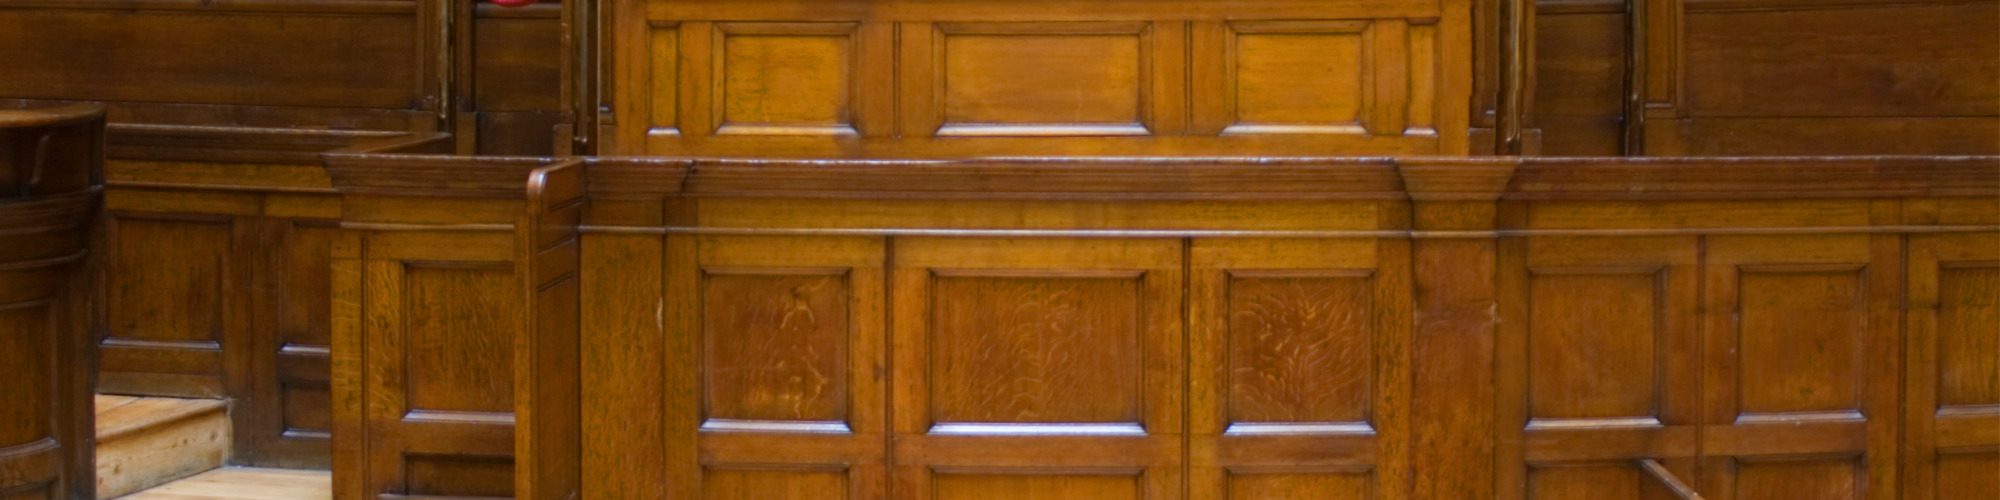 Crown Court Advocacy - Practical Tips for Your First Trial